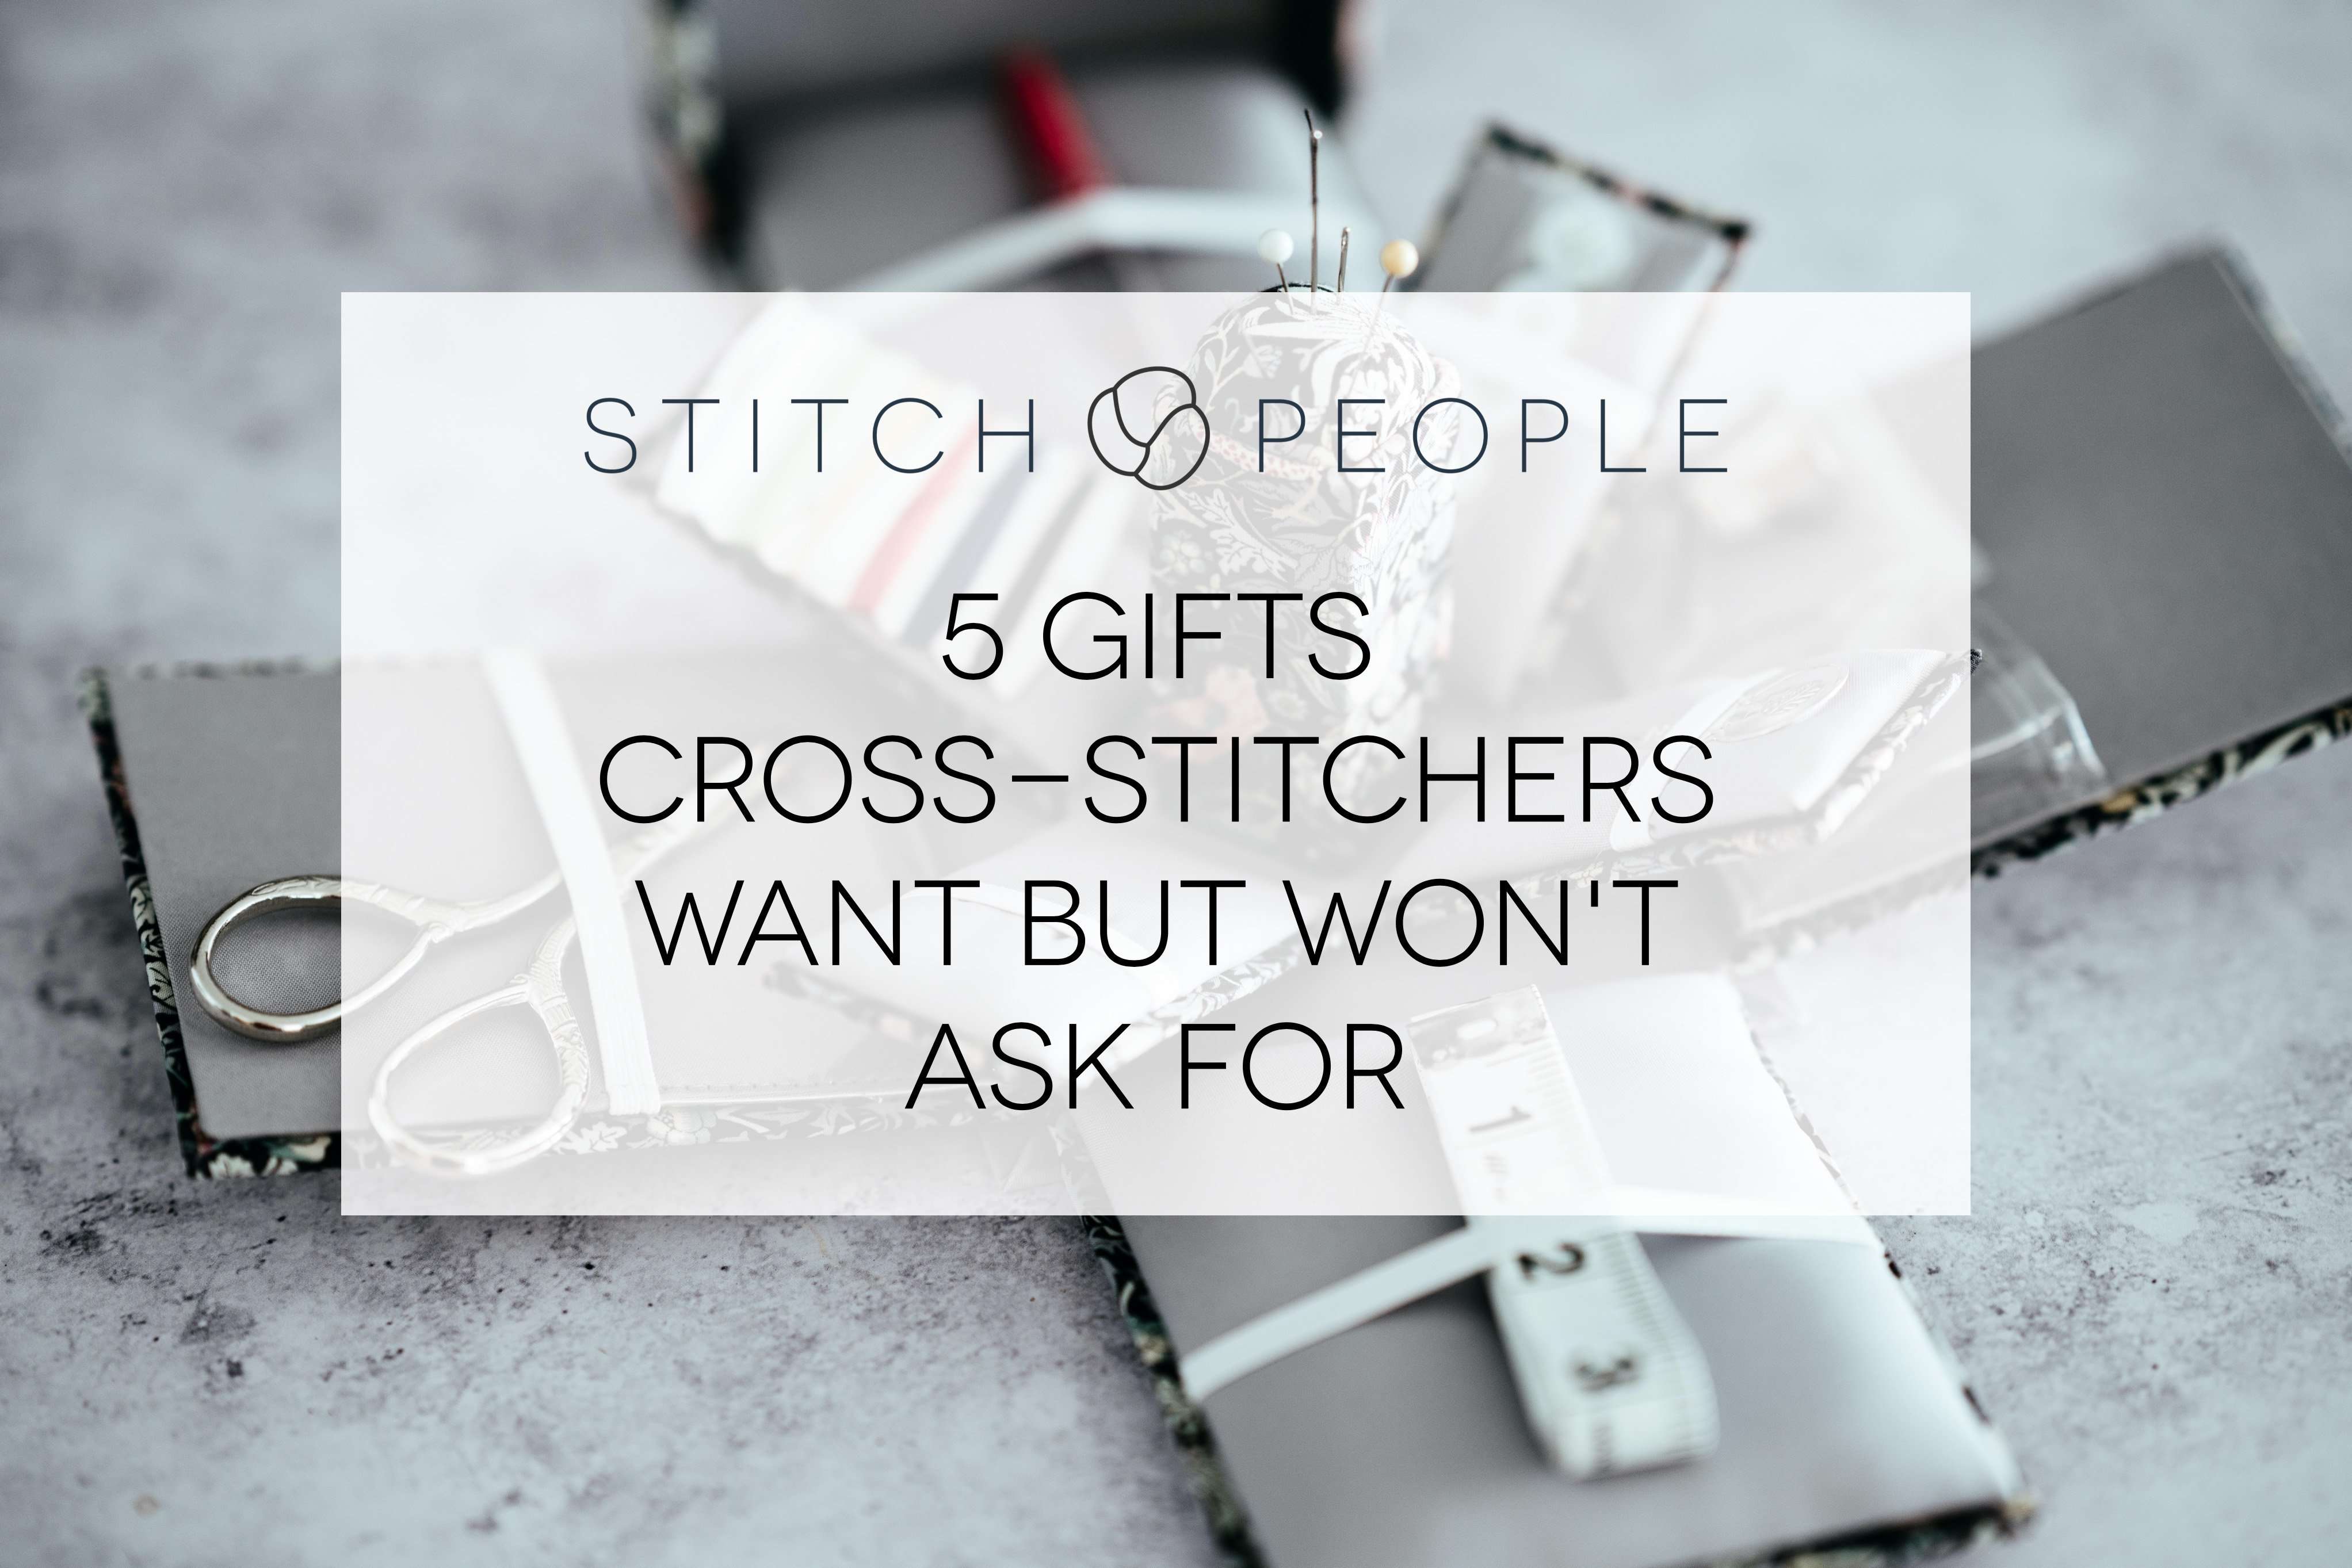 5 gifts cross-stitchers want but won't ask for - Stitch People Blog